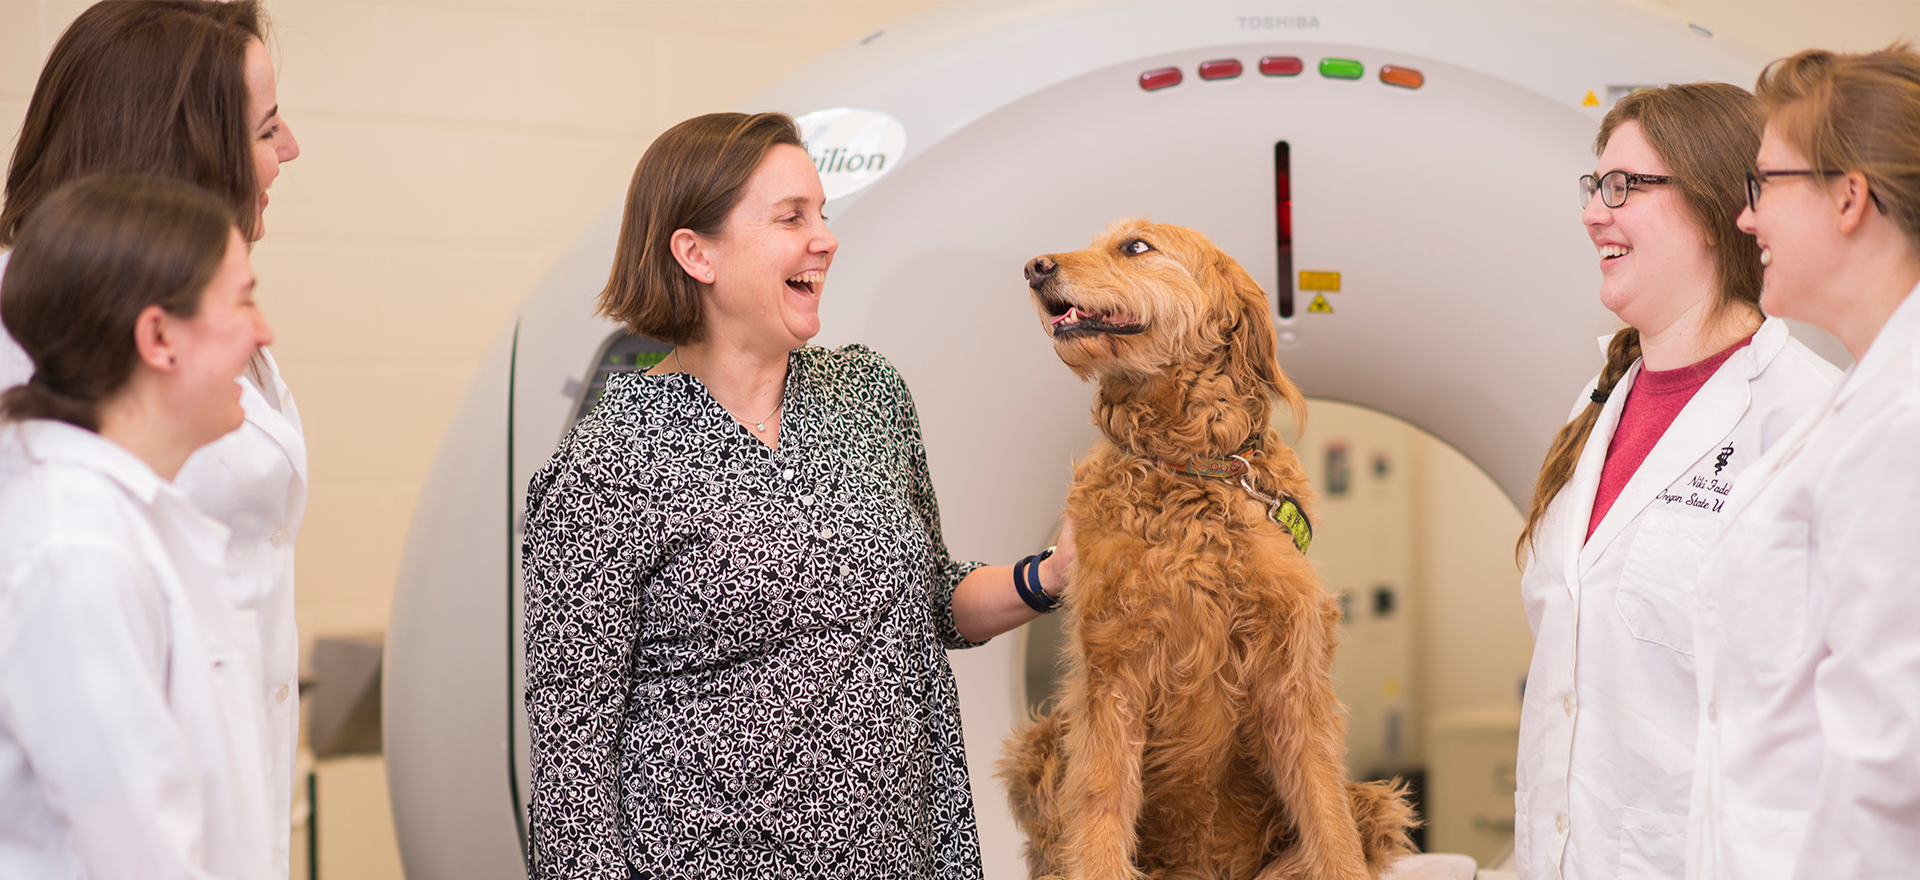 Dr. Stieger Vanegas with her dog at an MRI machine with 4 students in white lab coats.